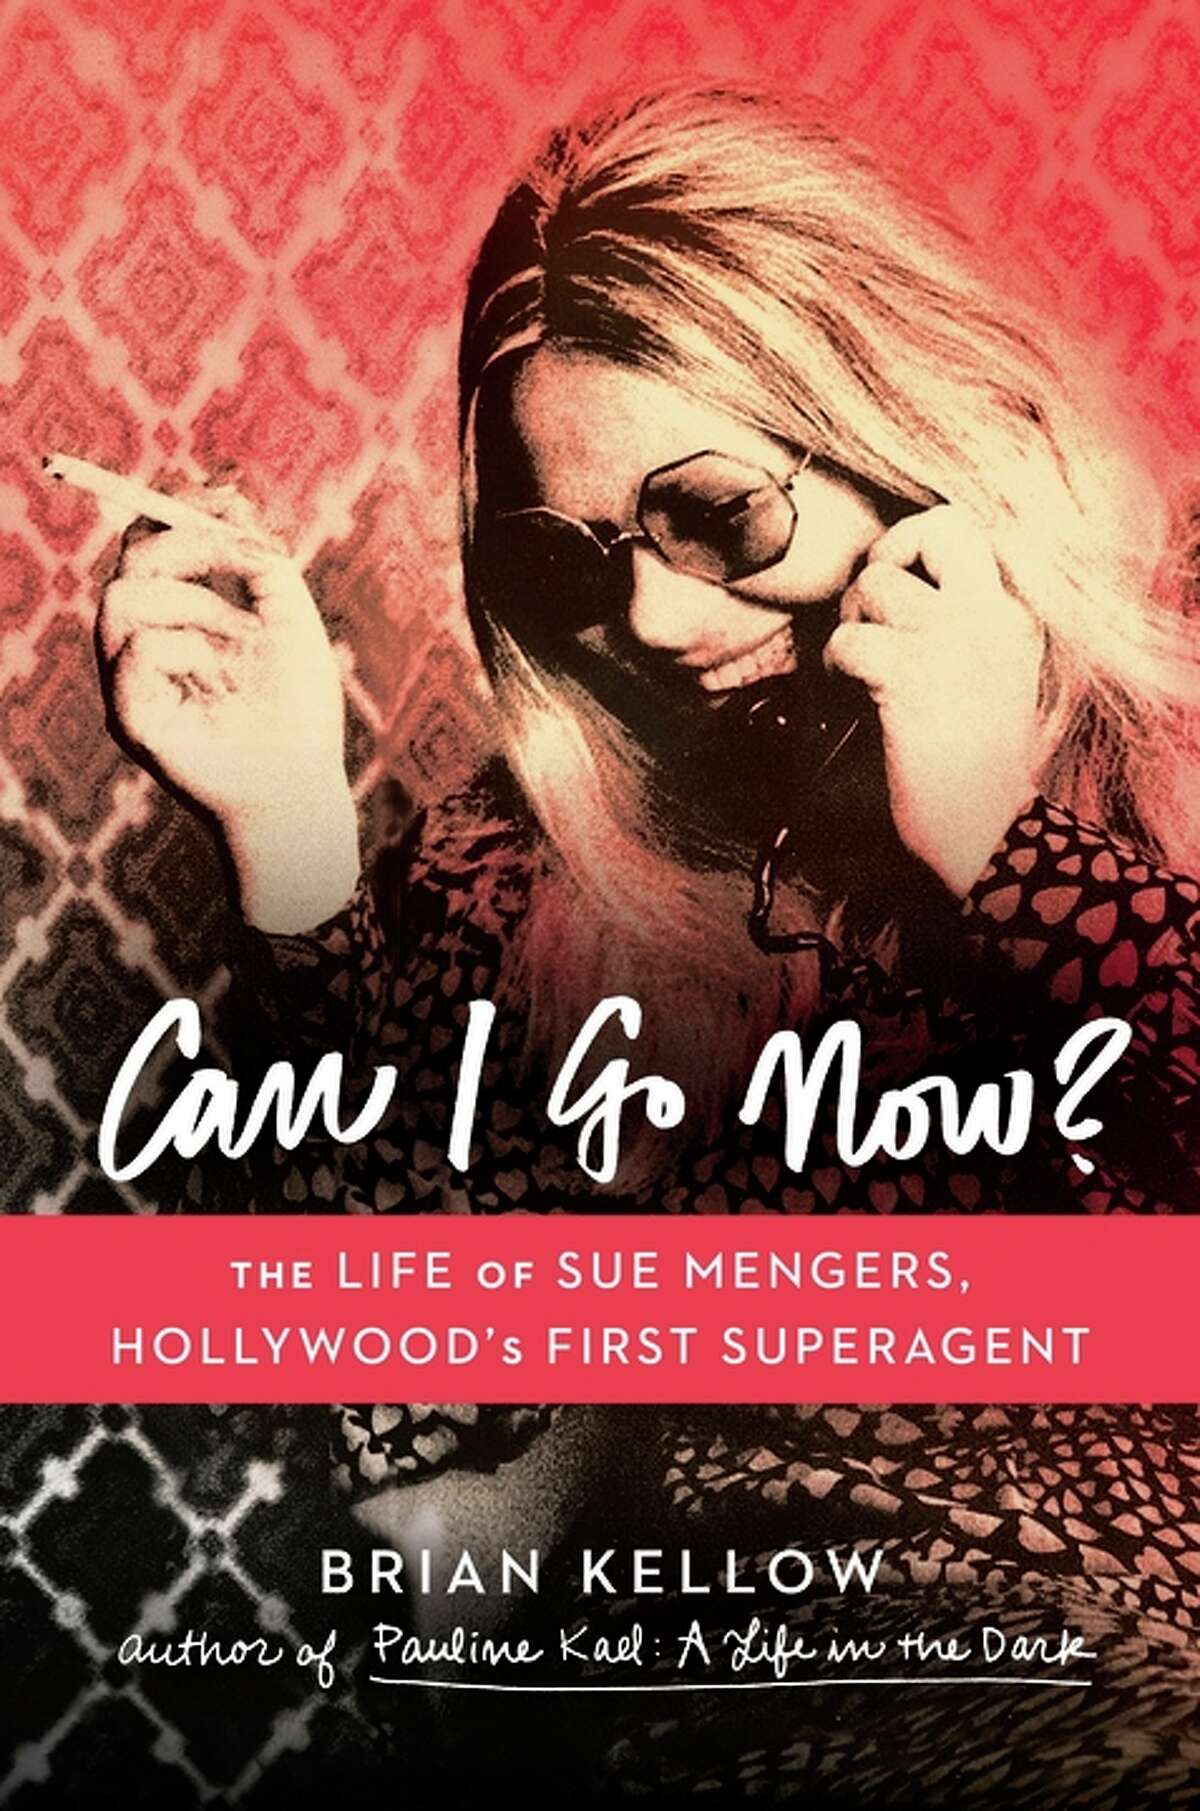 “Can I Go Now?: The Life of Sue Mengers, Hollywood’s First Superagent” by Brian Kellow doesn’t portray Mengers as a likable person.